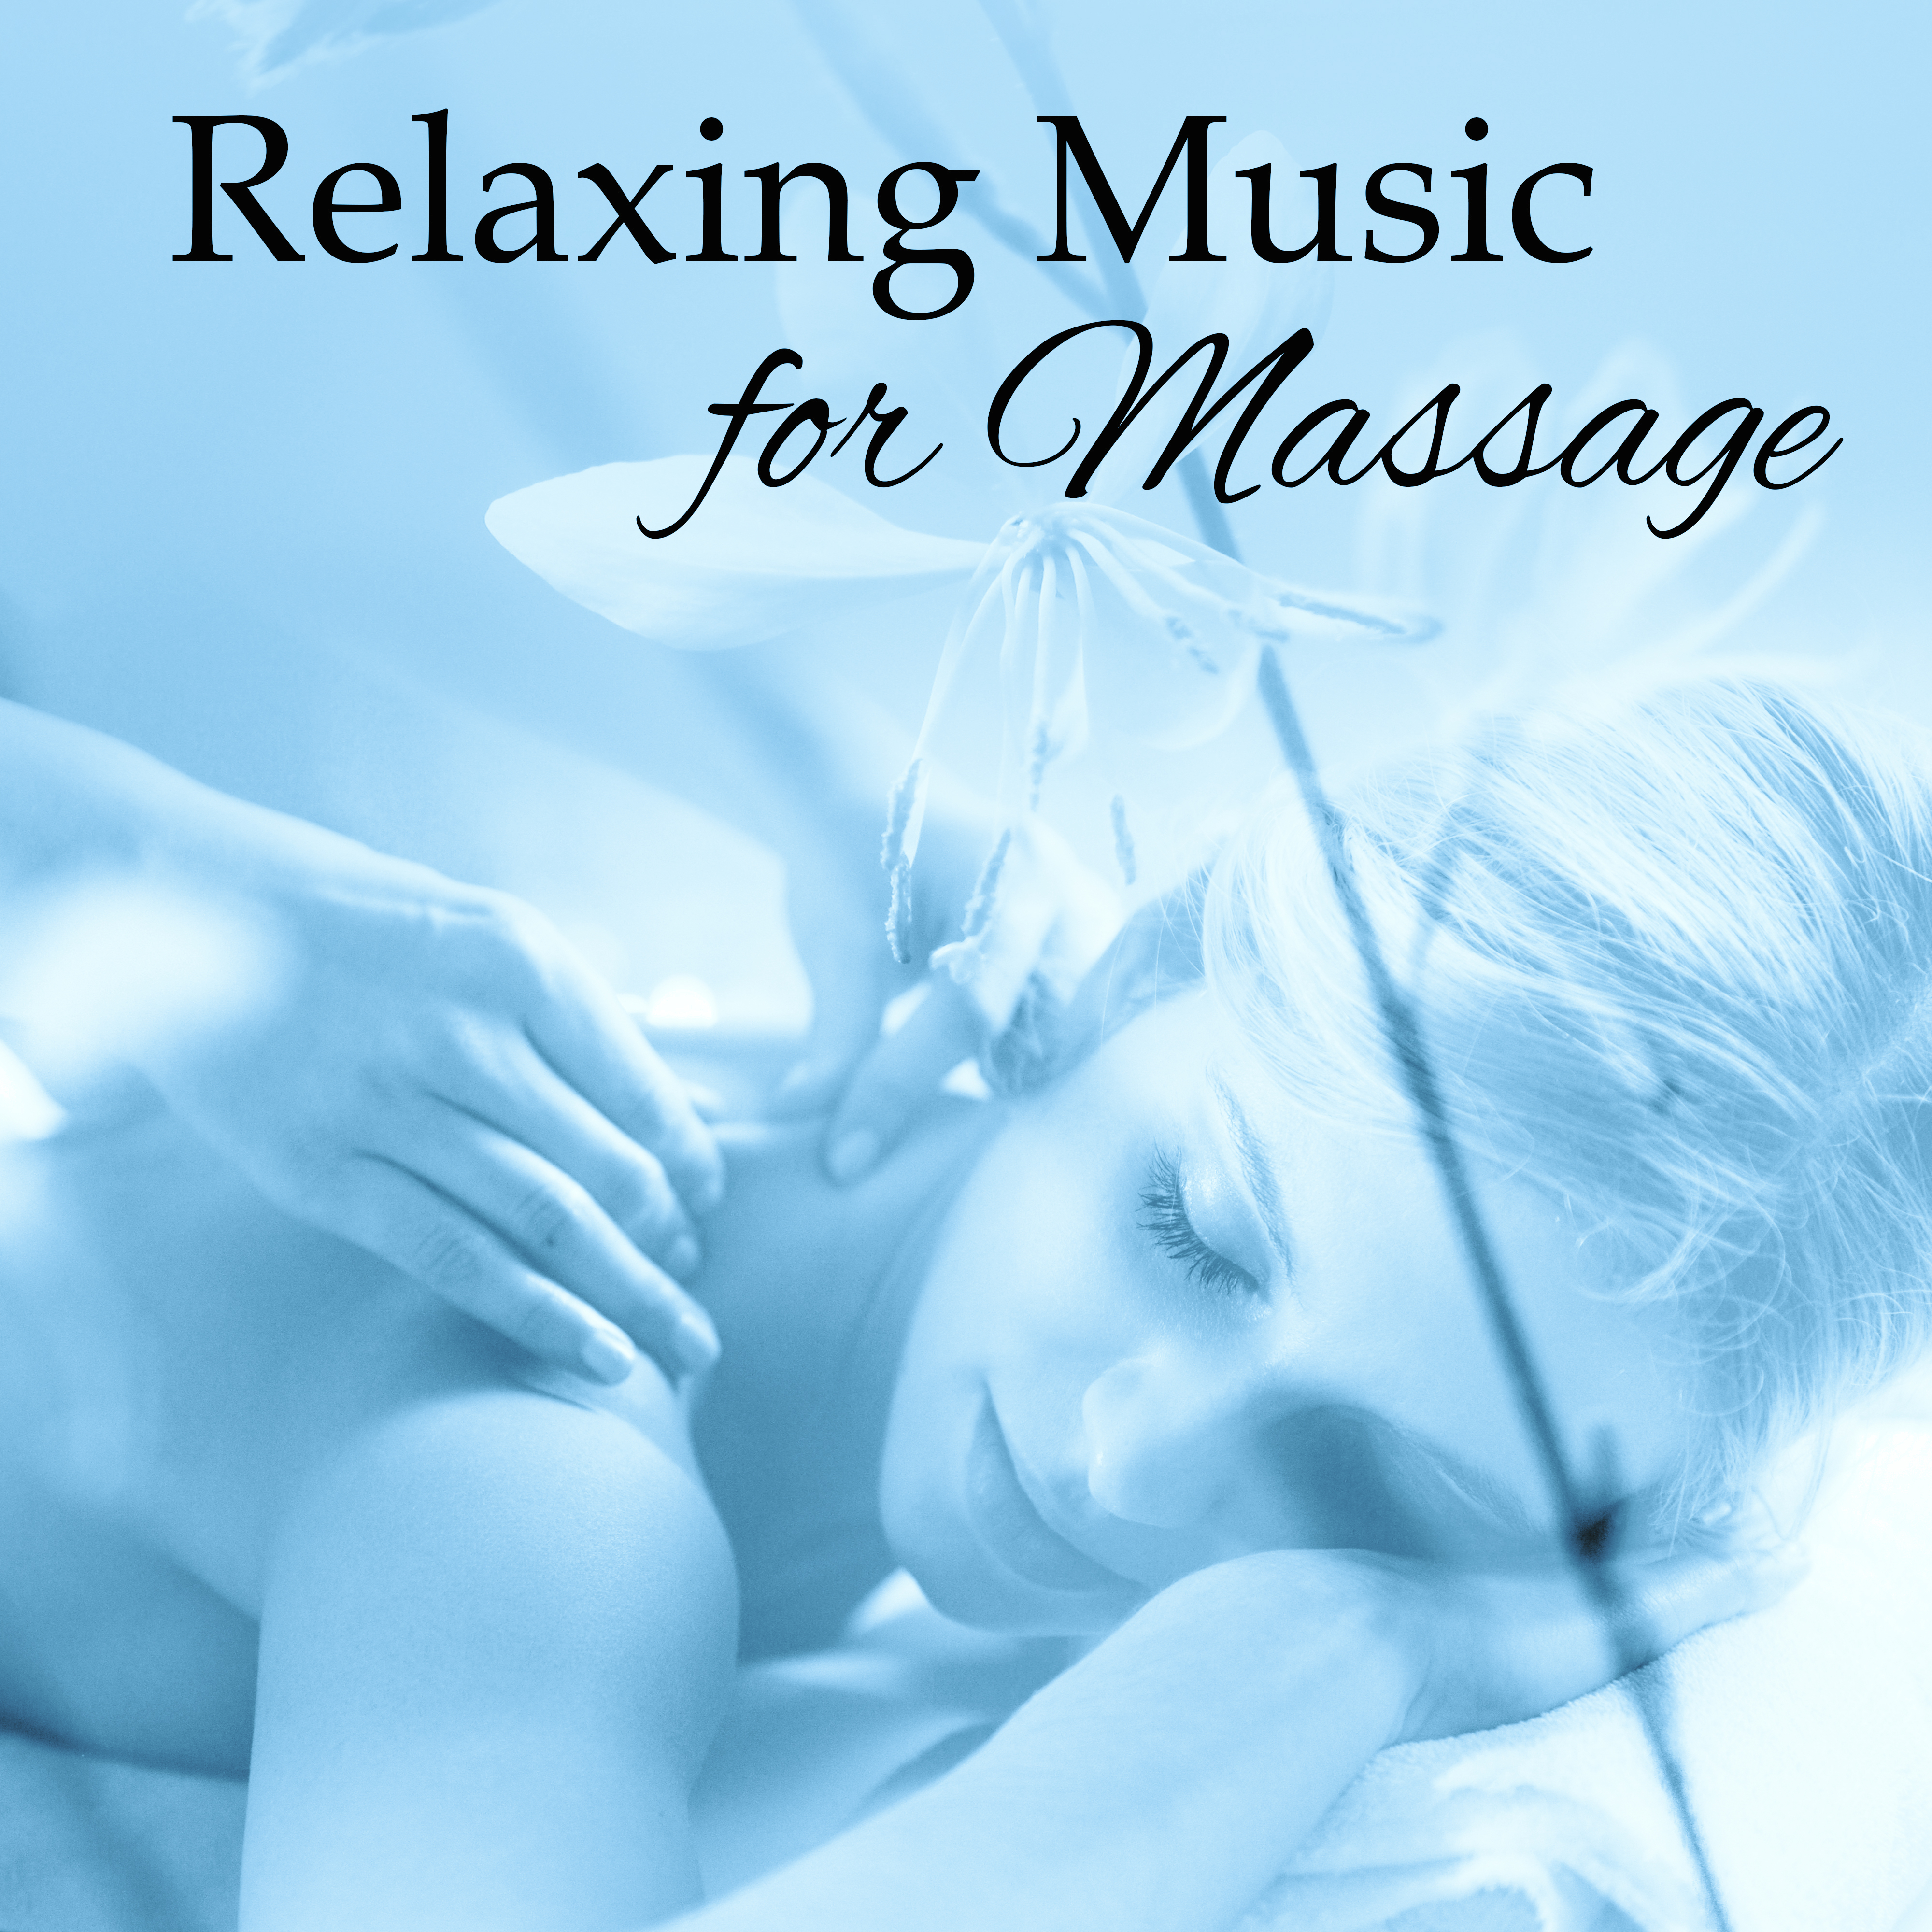 Relaxing Music for Massage  Soothing Sounds for Spa Hotel, Nature Waves, Healing Therapy, Time for Relaxation